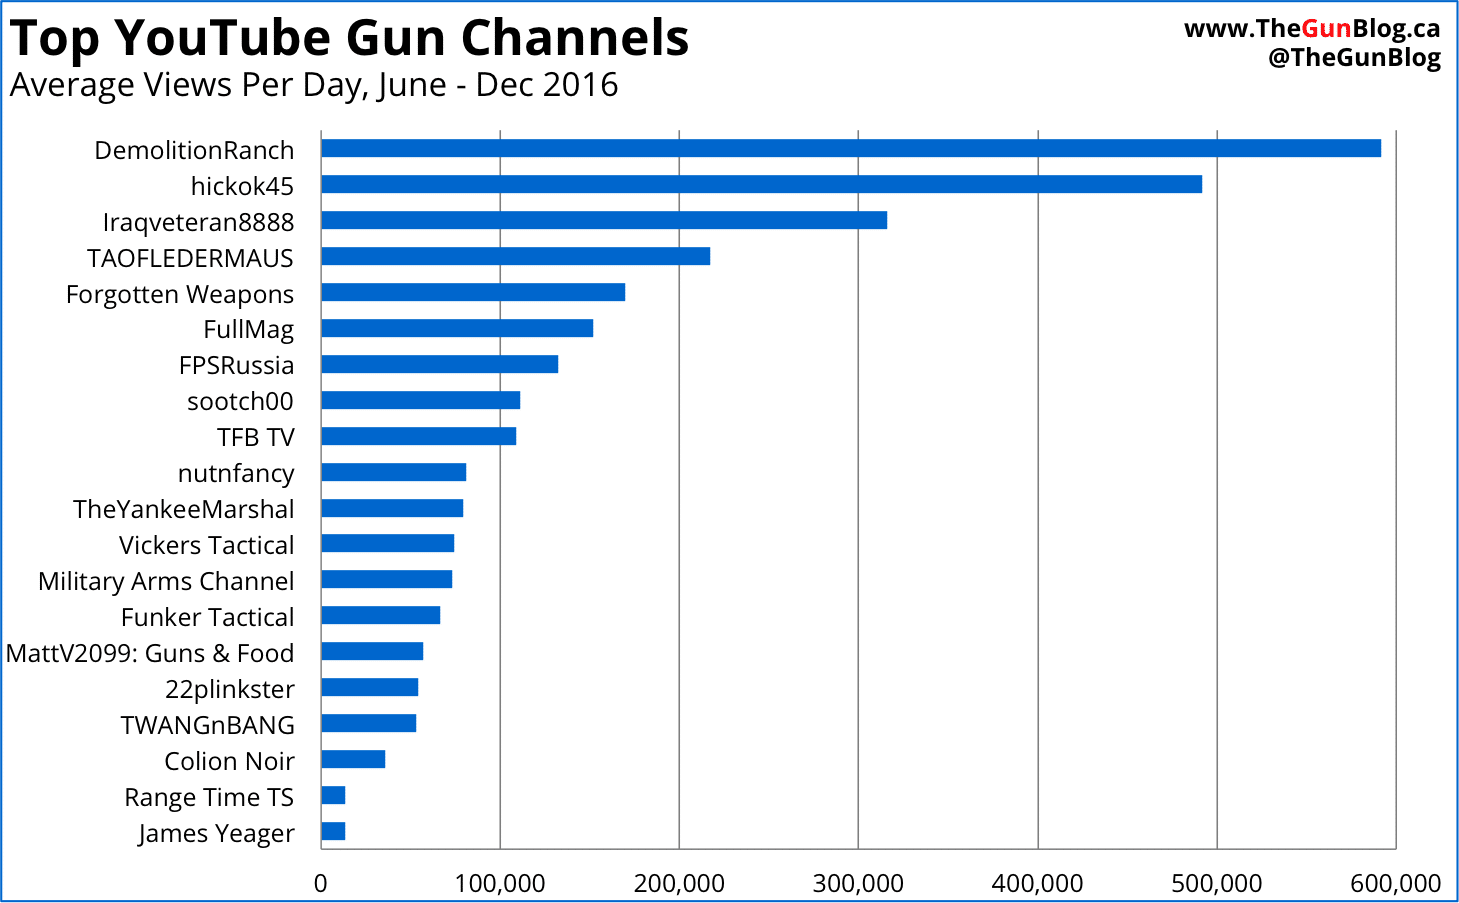 Top YouTube Gun Channels by Number of Videos